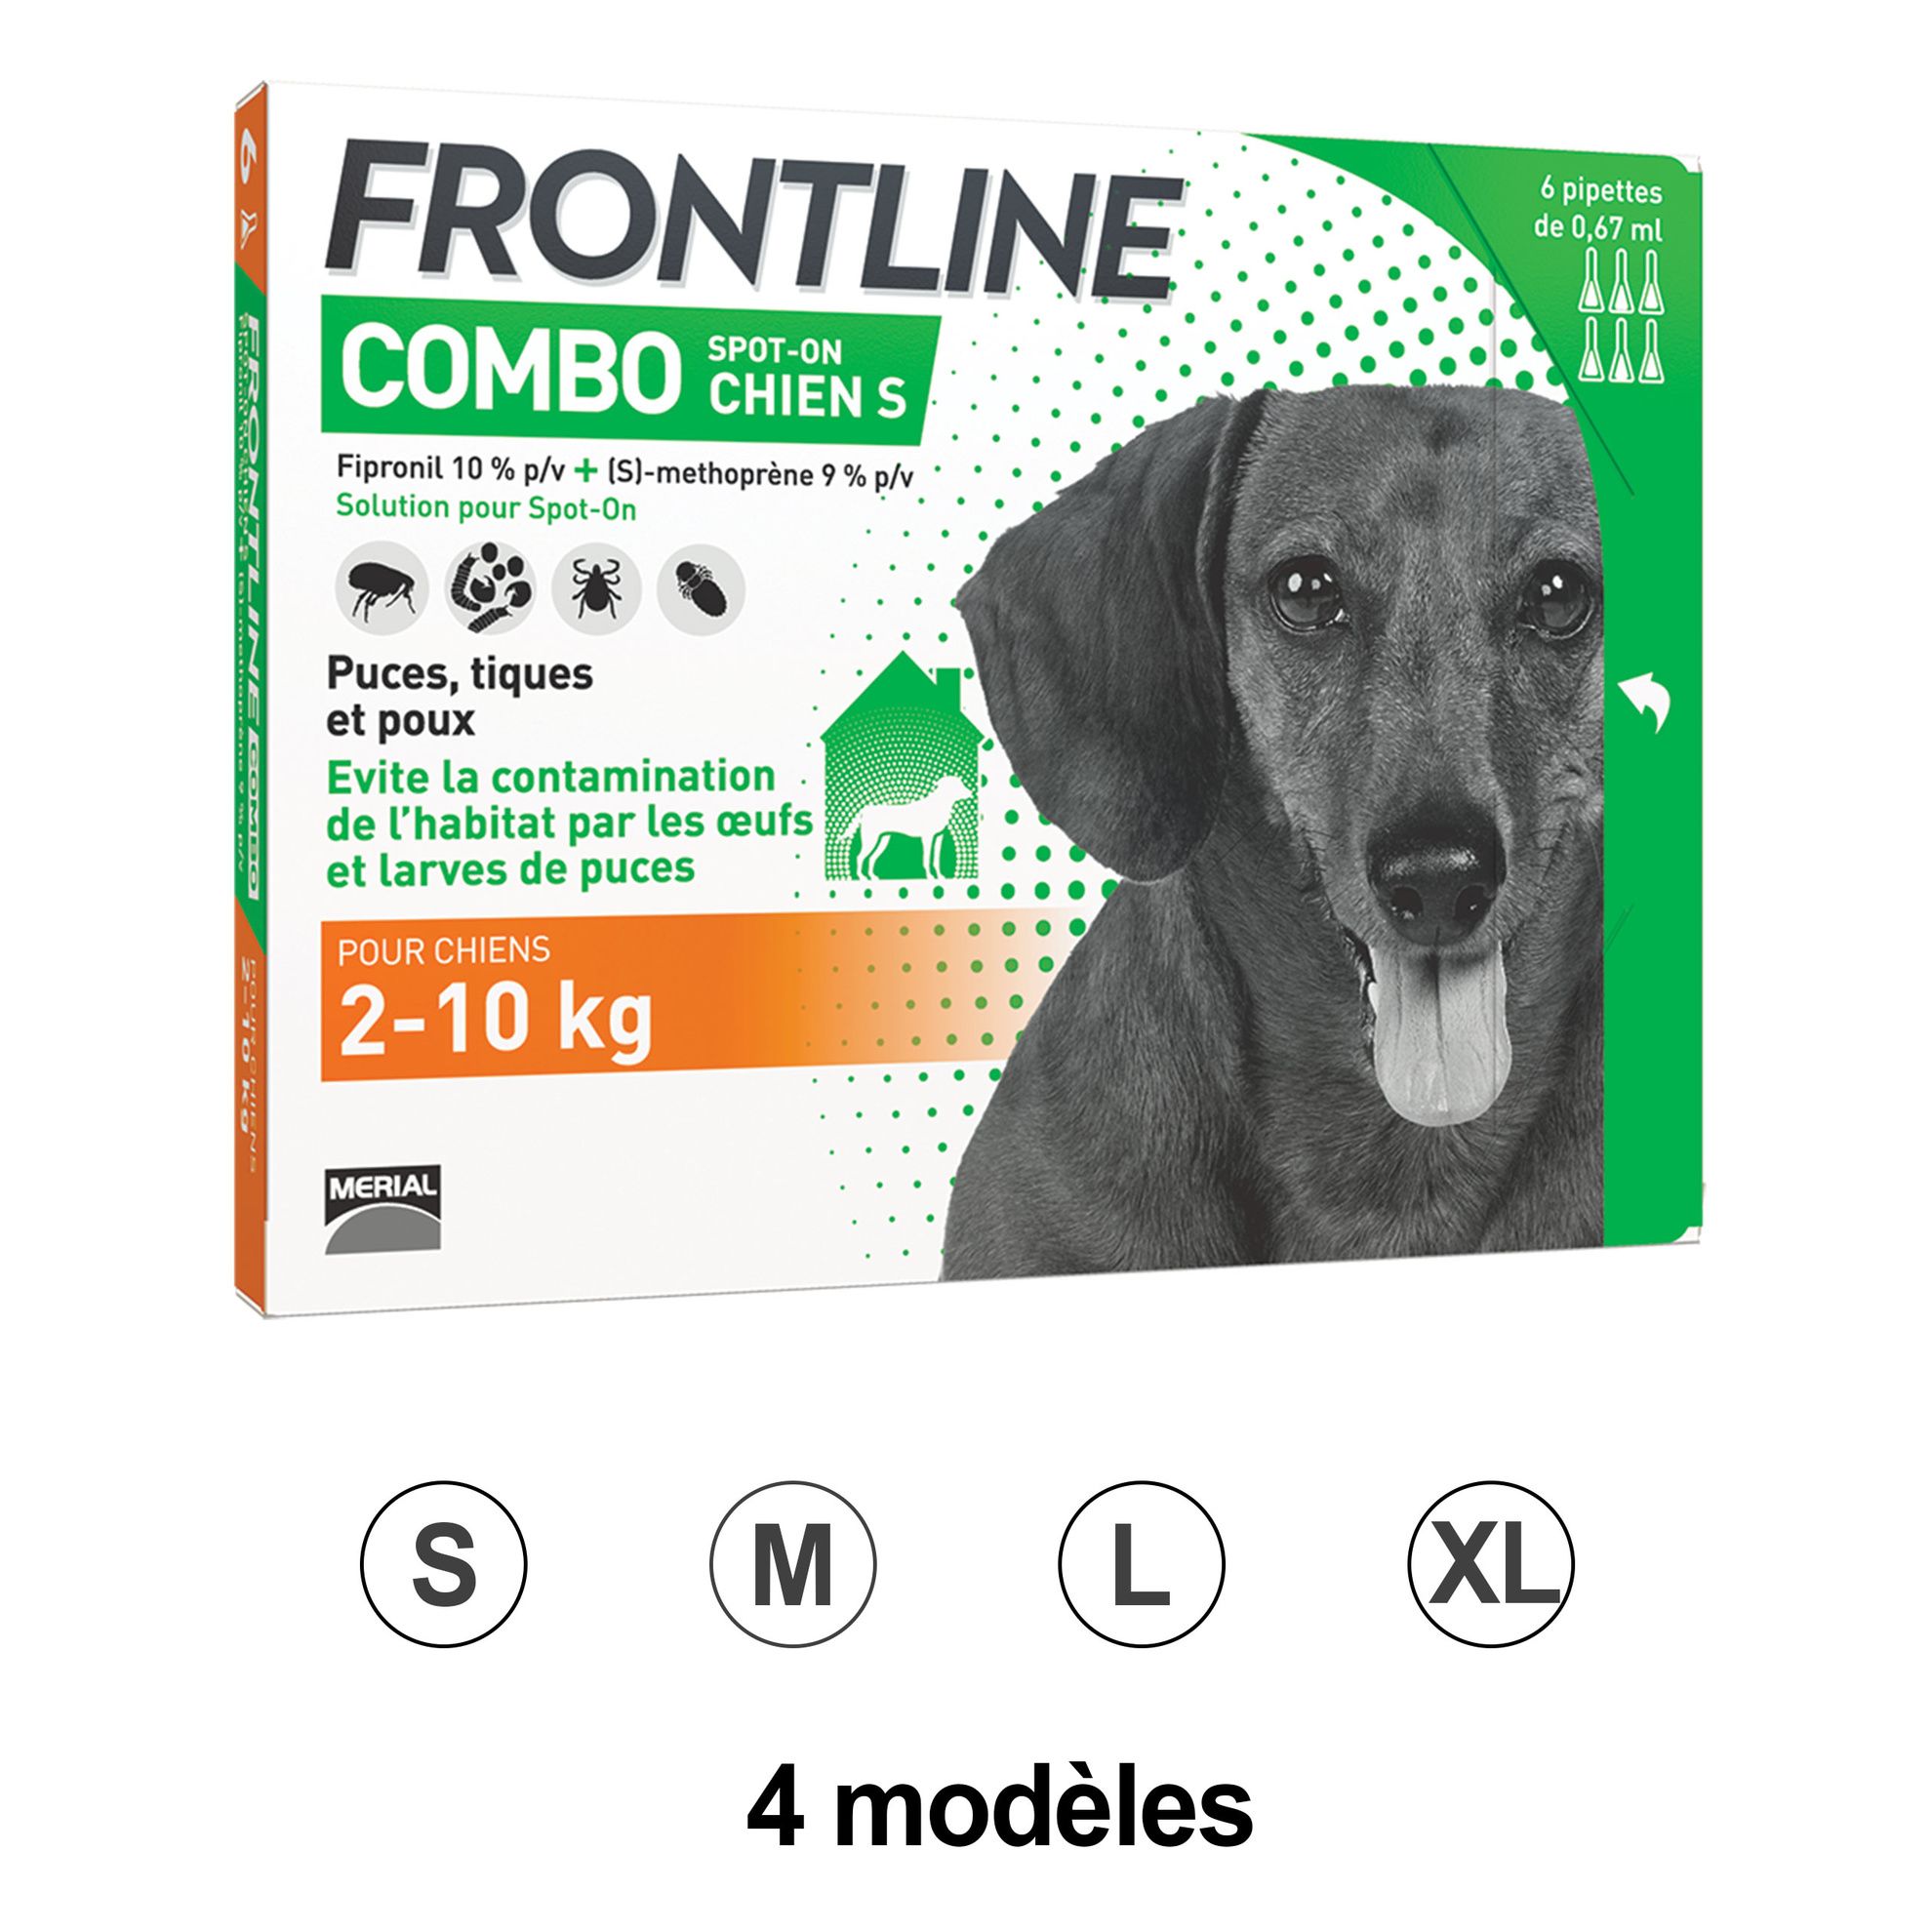 Pipettes Frontline Combo Chien Pipettes Natur Animo Notre Passion Vos Animaux